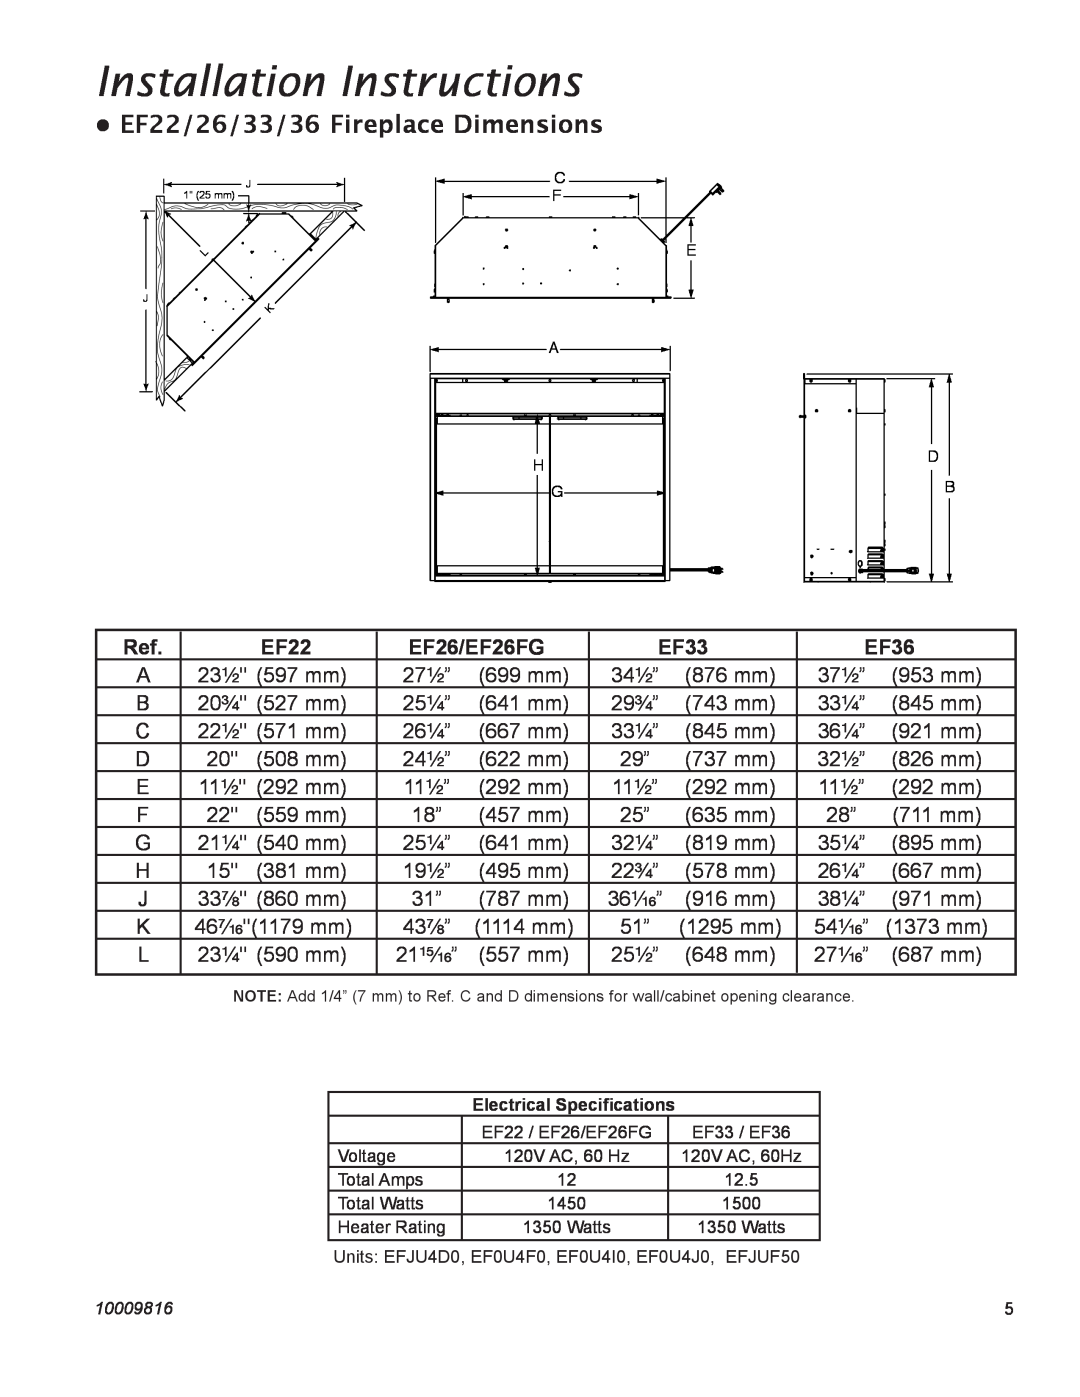 Vermont Casting EF26FG operating instructions Installation Instructions, EF22/26/33/36 Fireplace Dimensions 